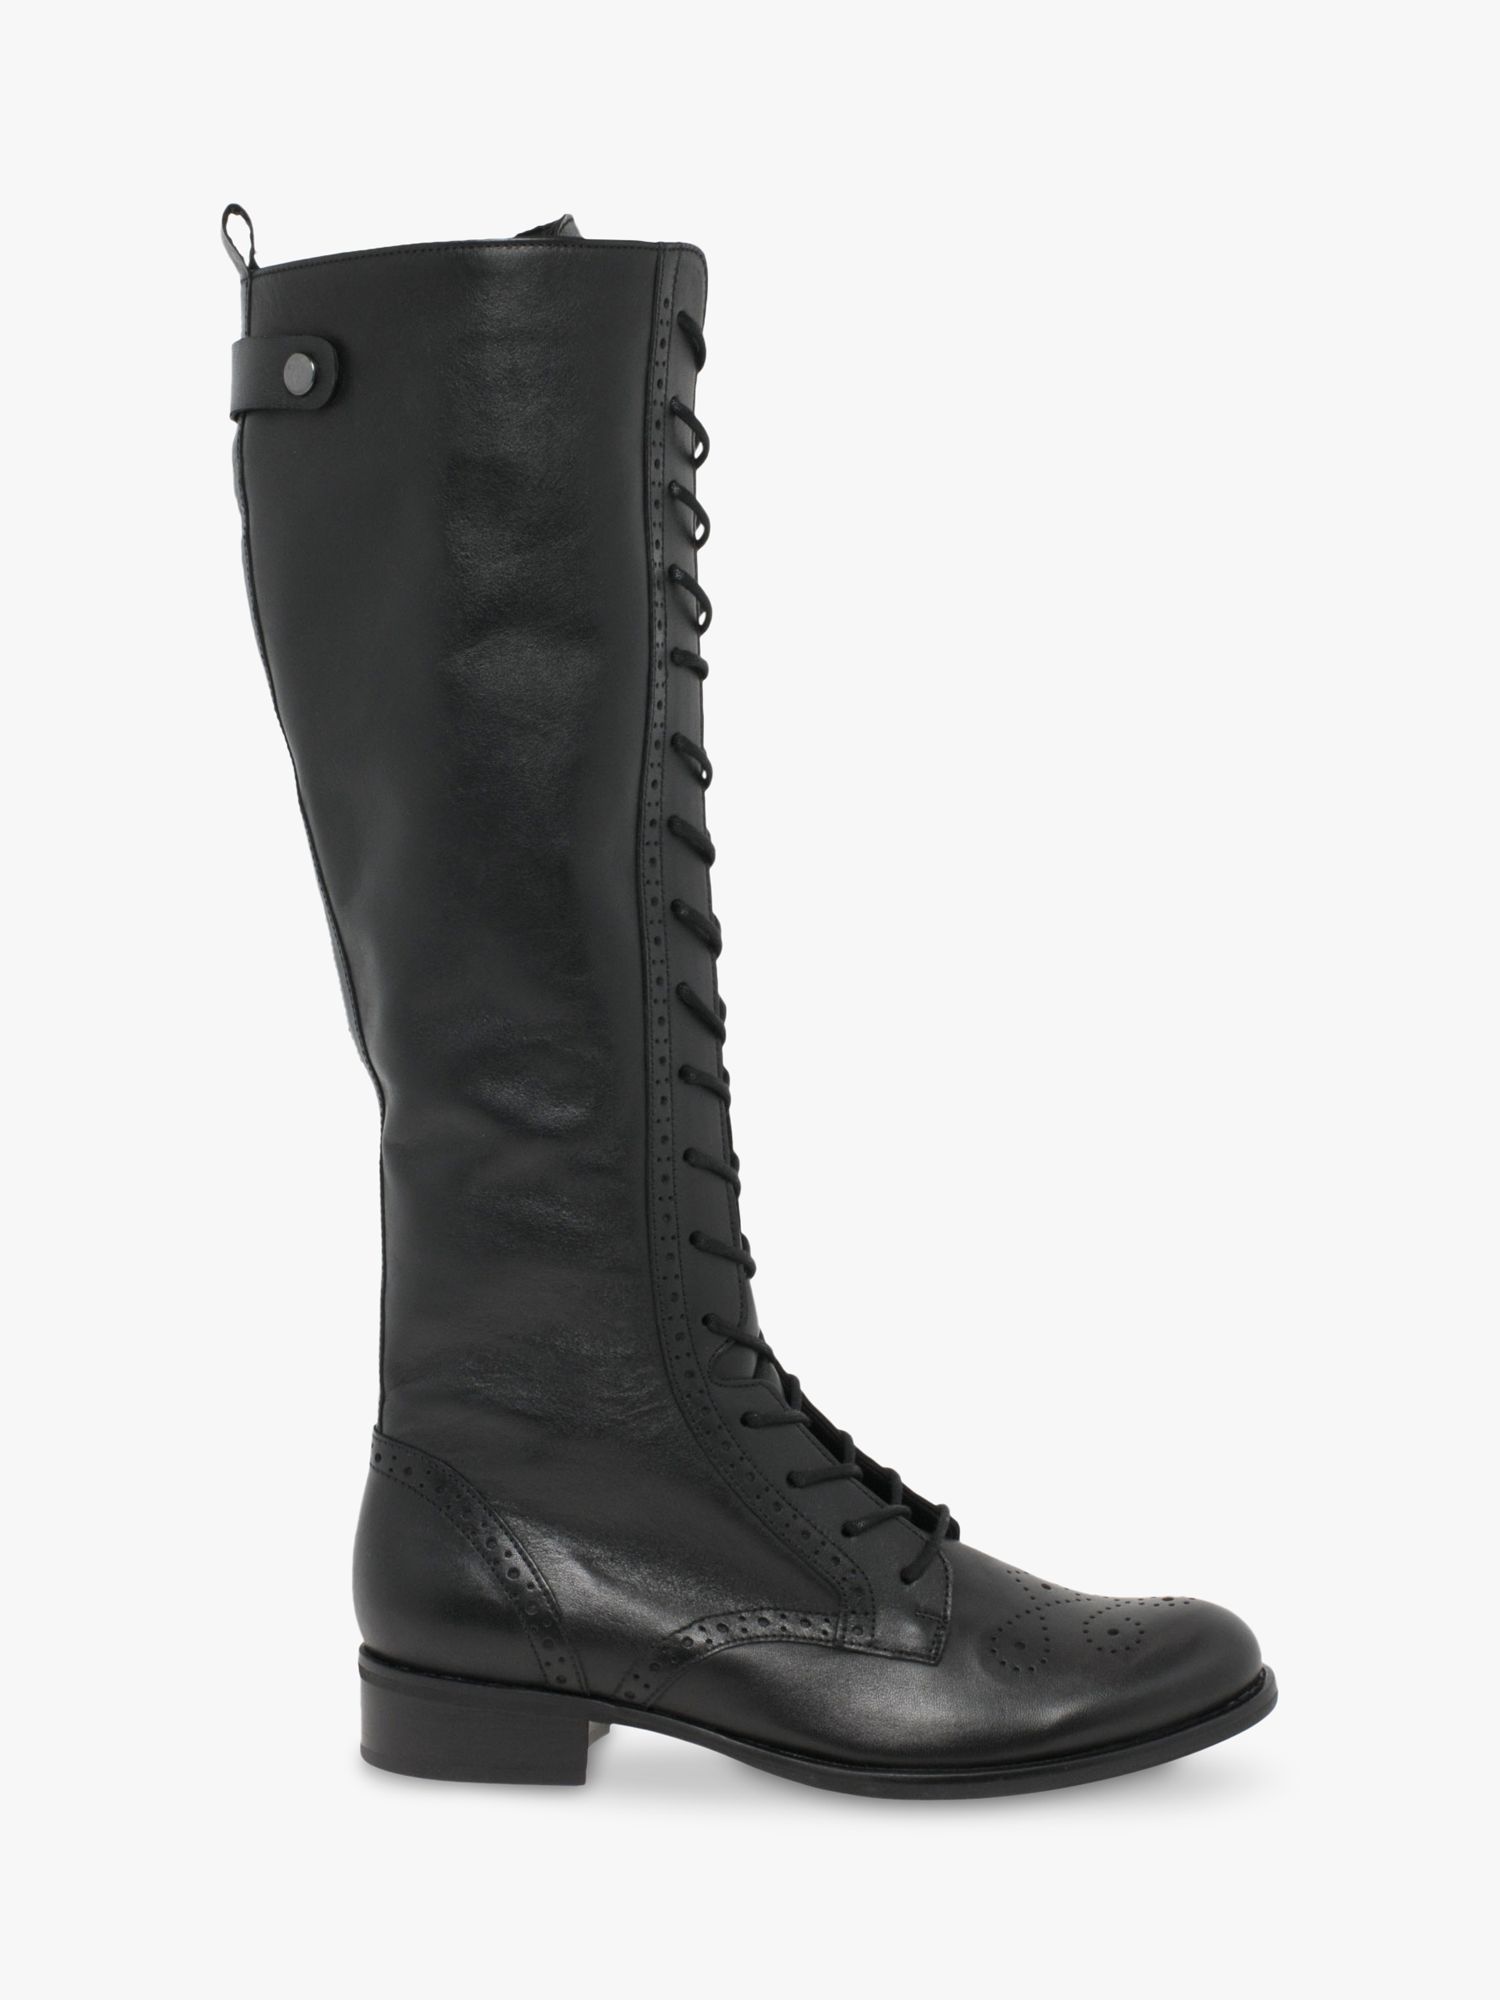 Gabor Protect Leather Lace Up Knee High Boots, Black at John Lewis ...